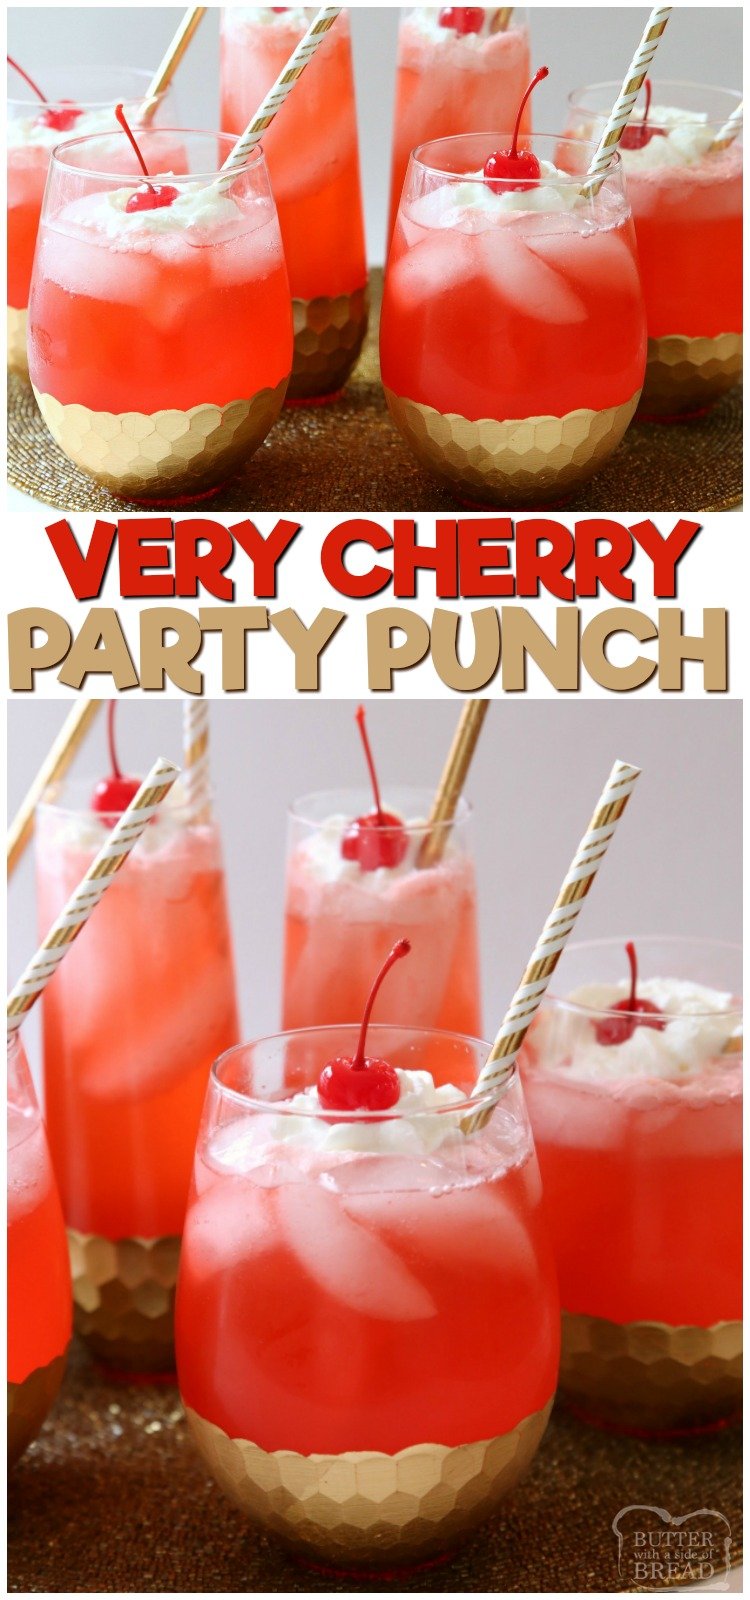 Easy Cherry Party Punch is a fun & festive party drink that everyone goes crazy over! Simple to make & has a fantastic sweet cherry flavor. #cherry #party #punch #drink #beverage #partypunch #verycherry #recipe from BUTTER WITH A SIDE OF BREAD